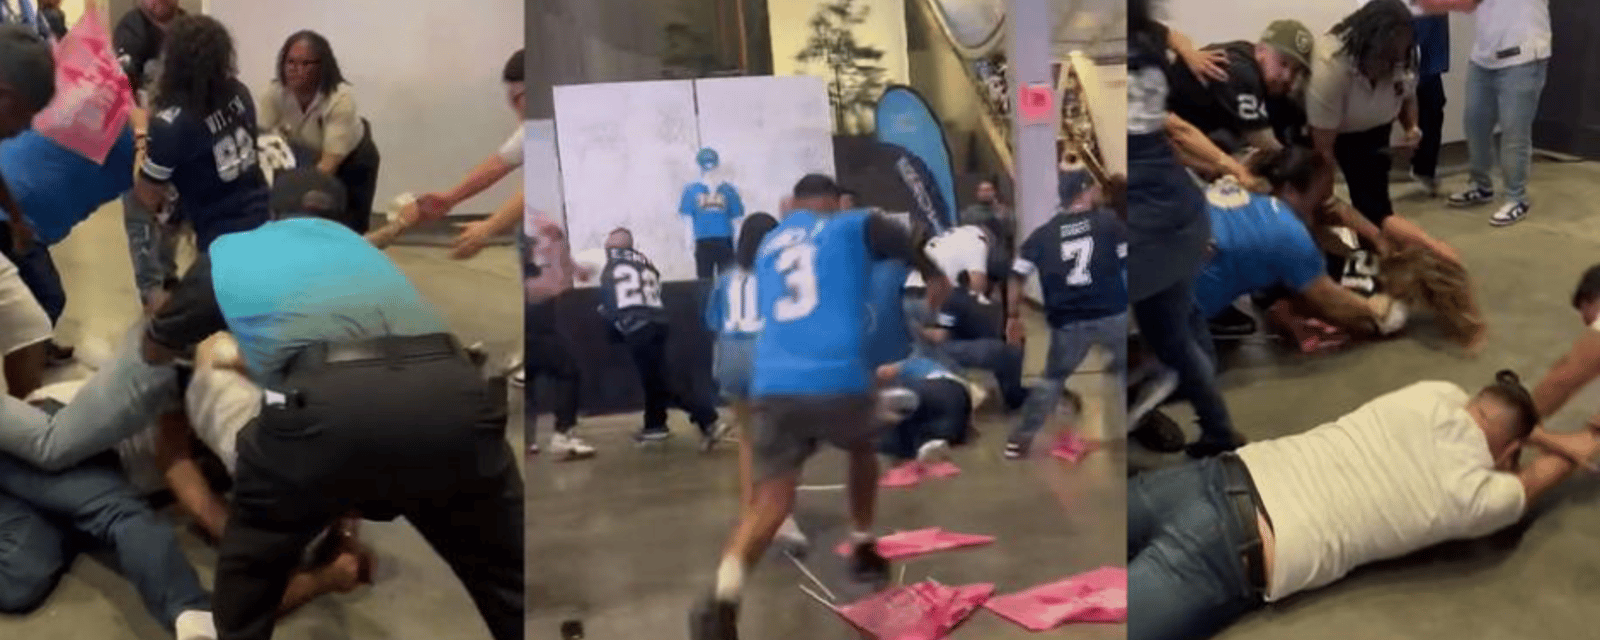 10+ person brawl between Cowboys/Chargers fans goes viral 